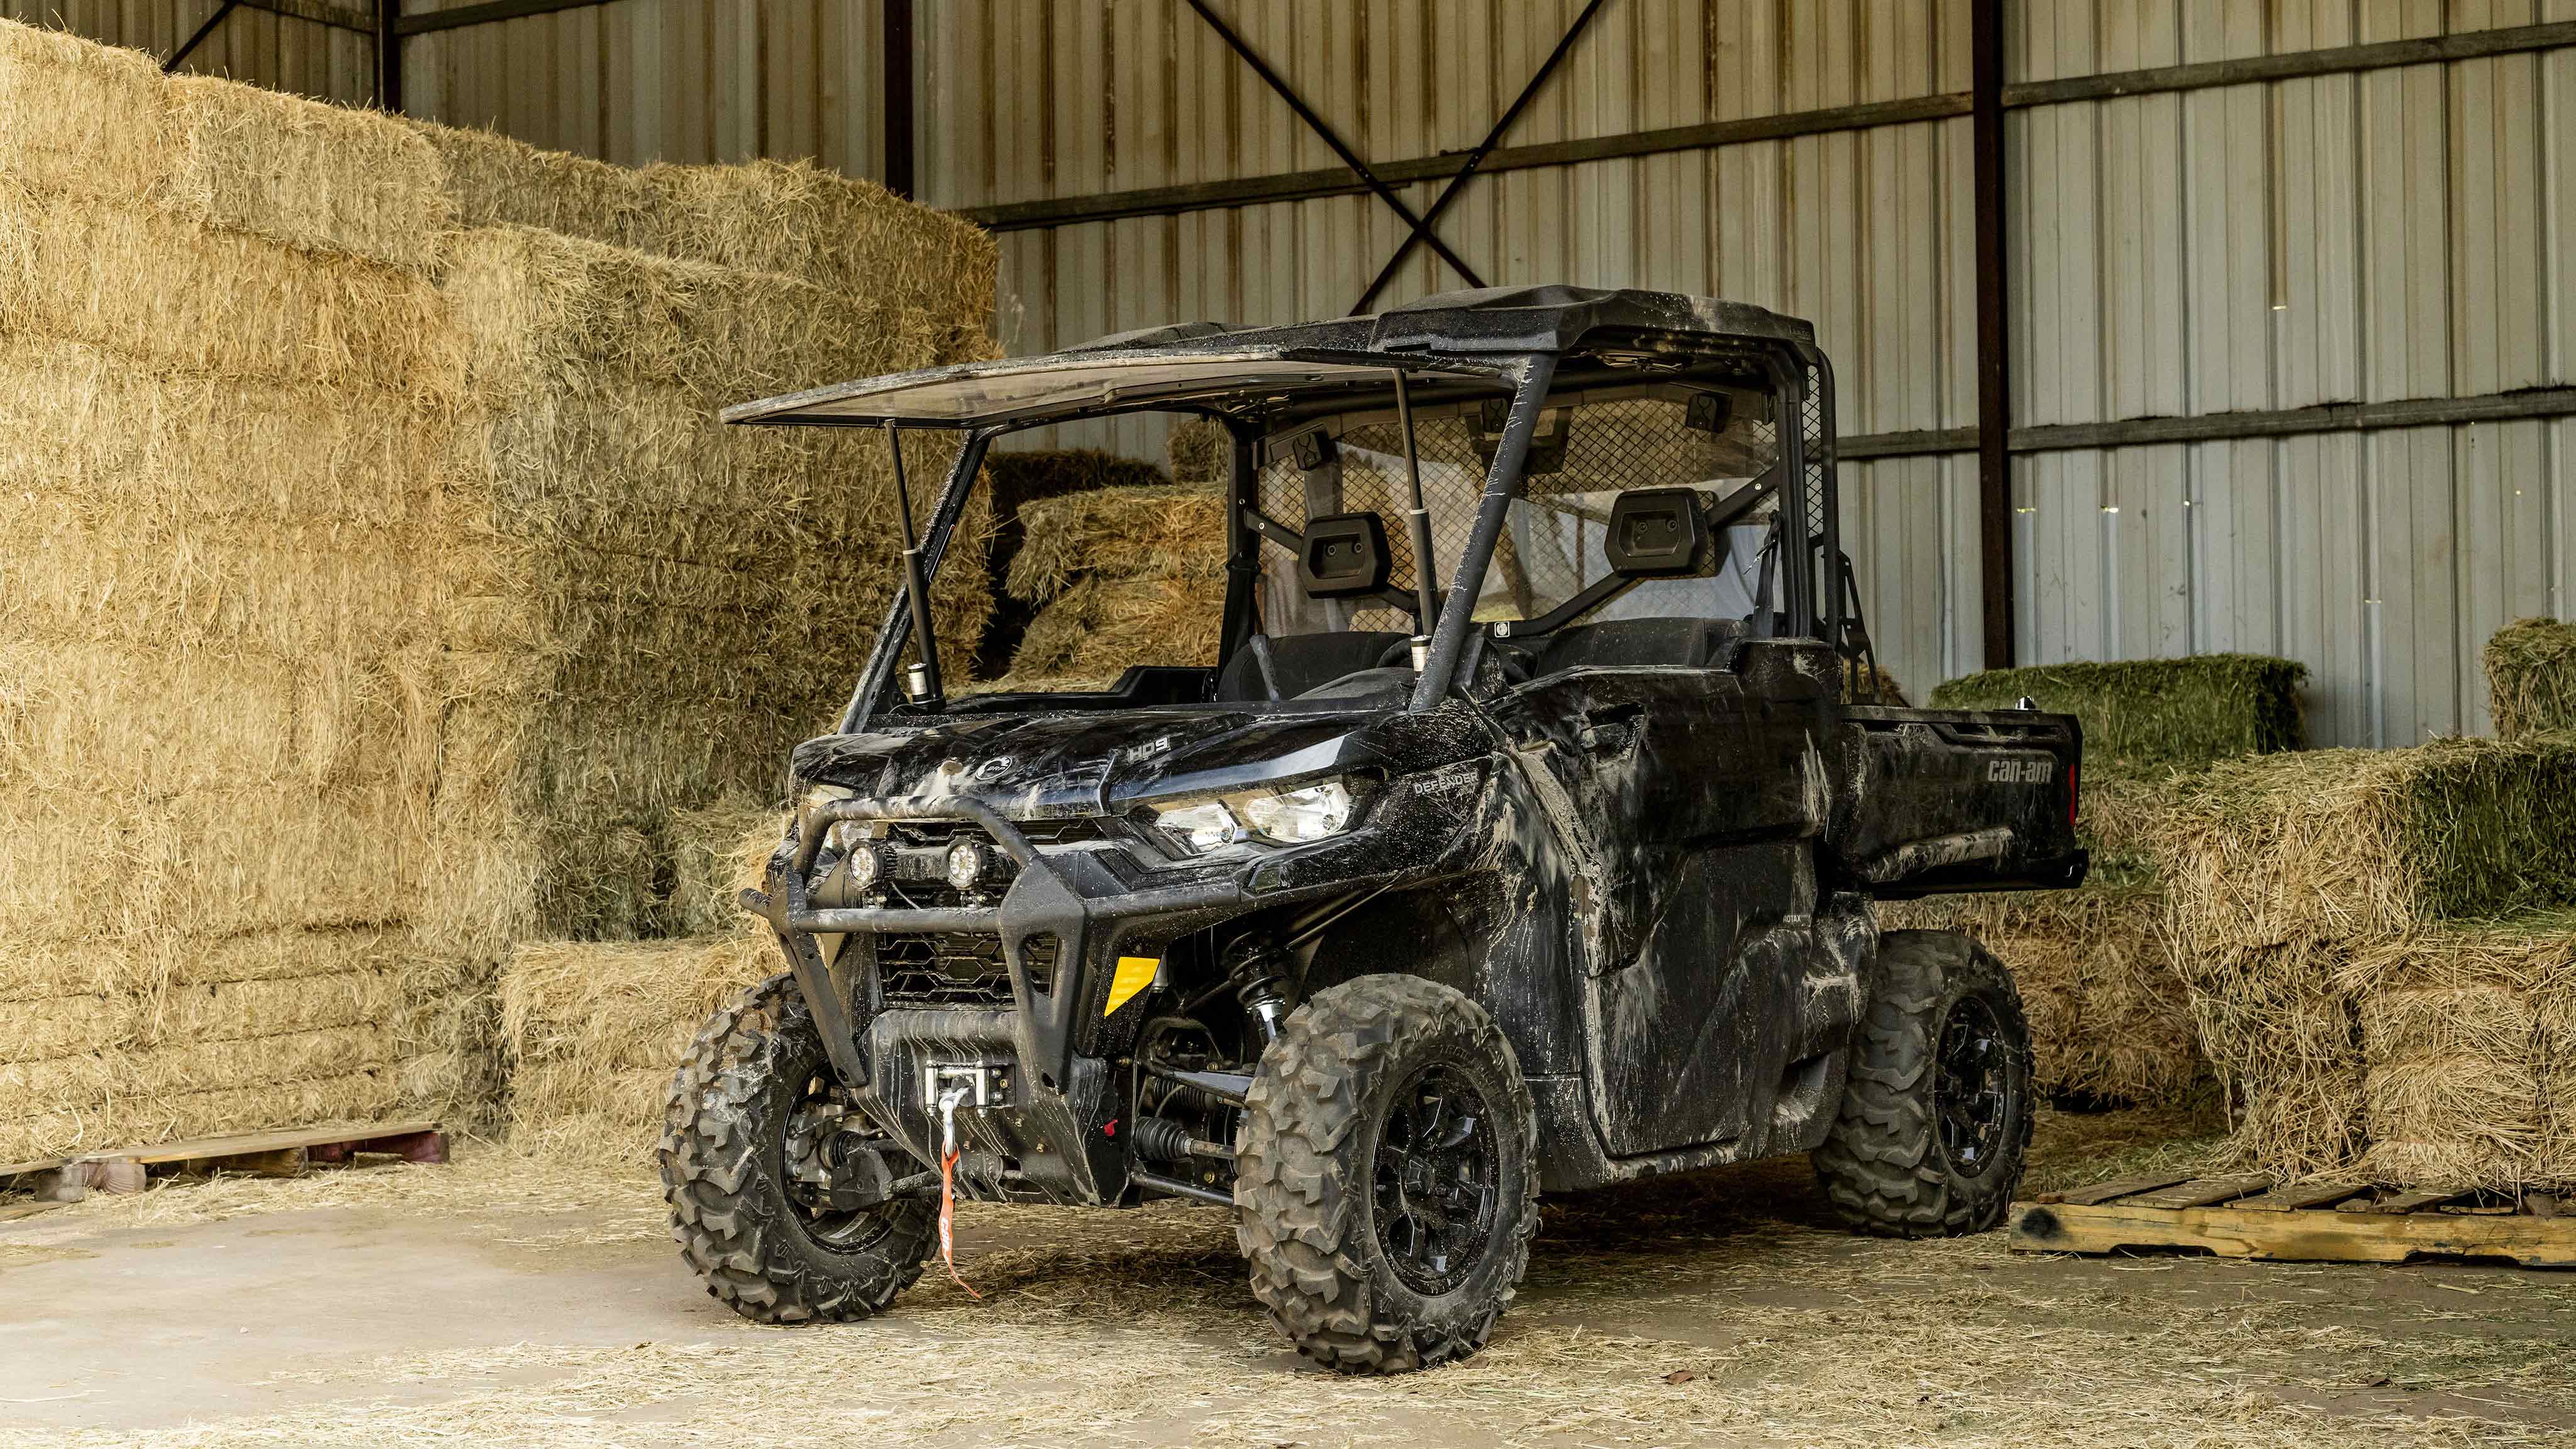 A Can-Am Defender SxS parked in a barn